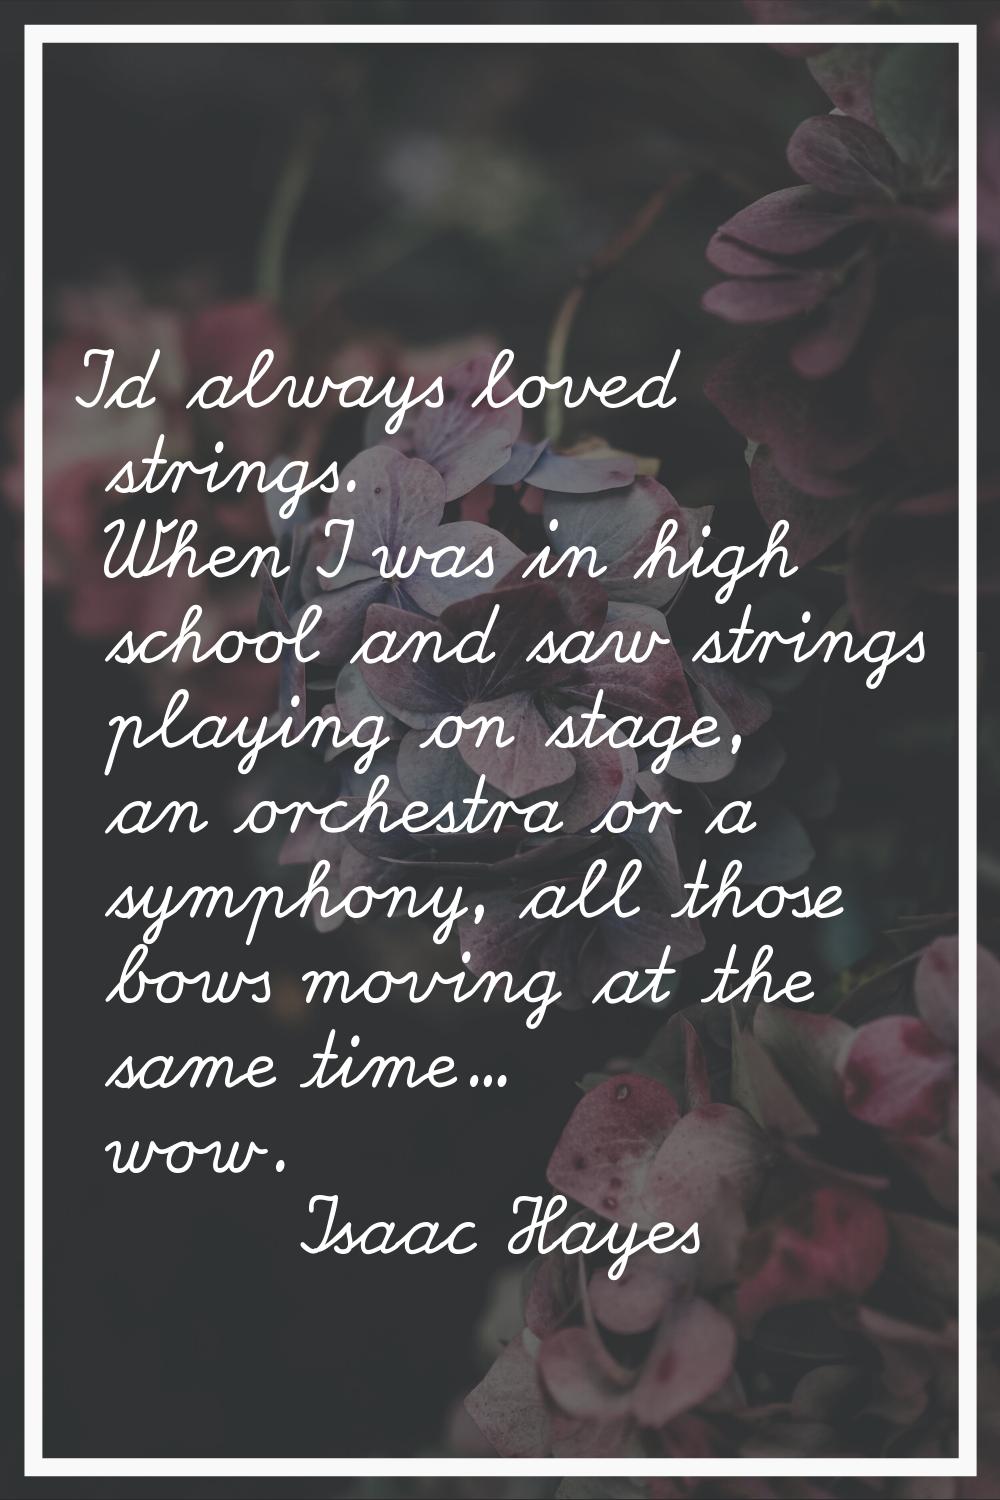 I'd always loved strings. When I was in high school and saw strings playing on stage, an orchestra 